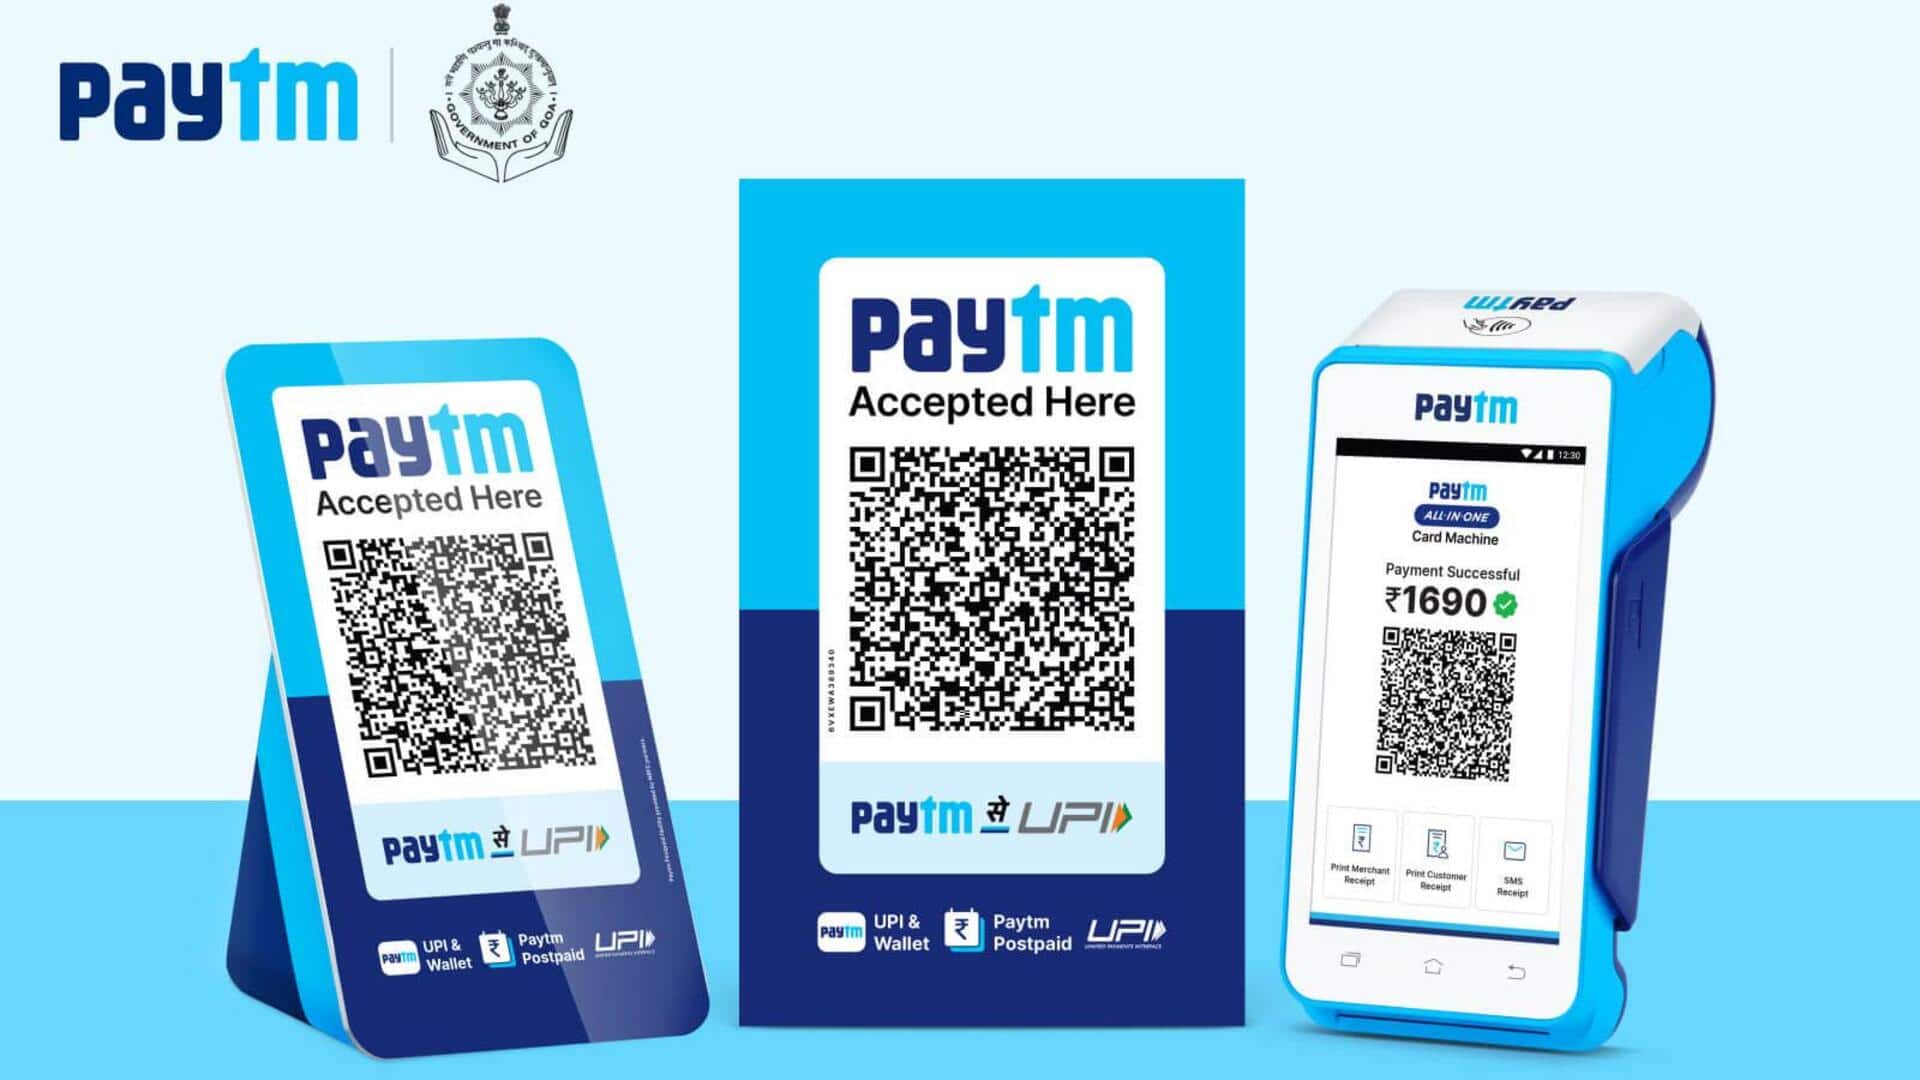 RBI steps in to maintain UPI continuity for Paytm users